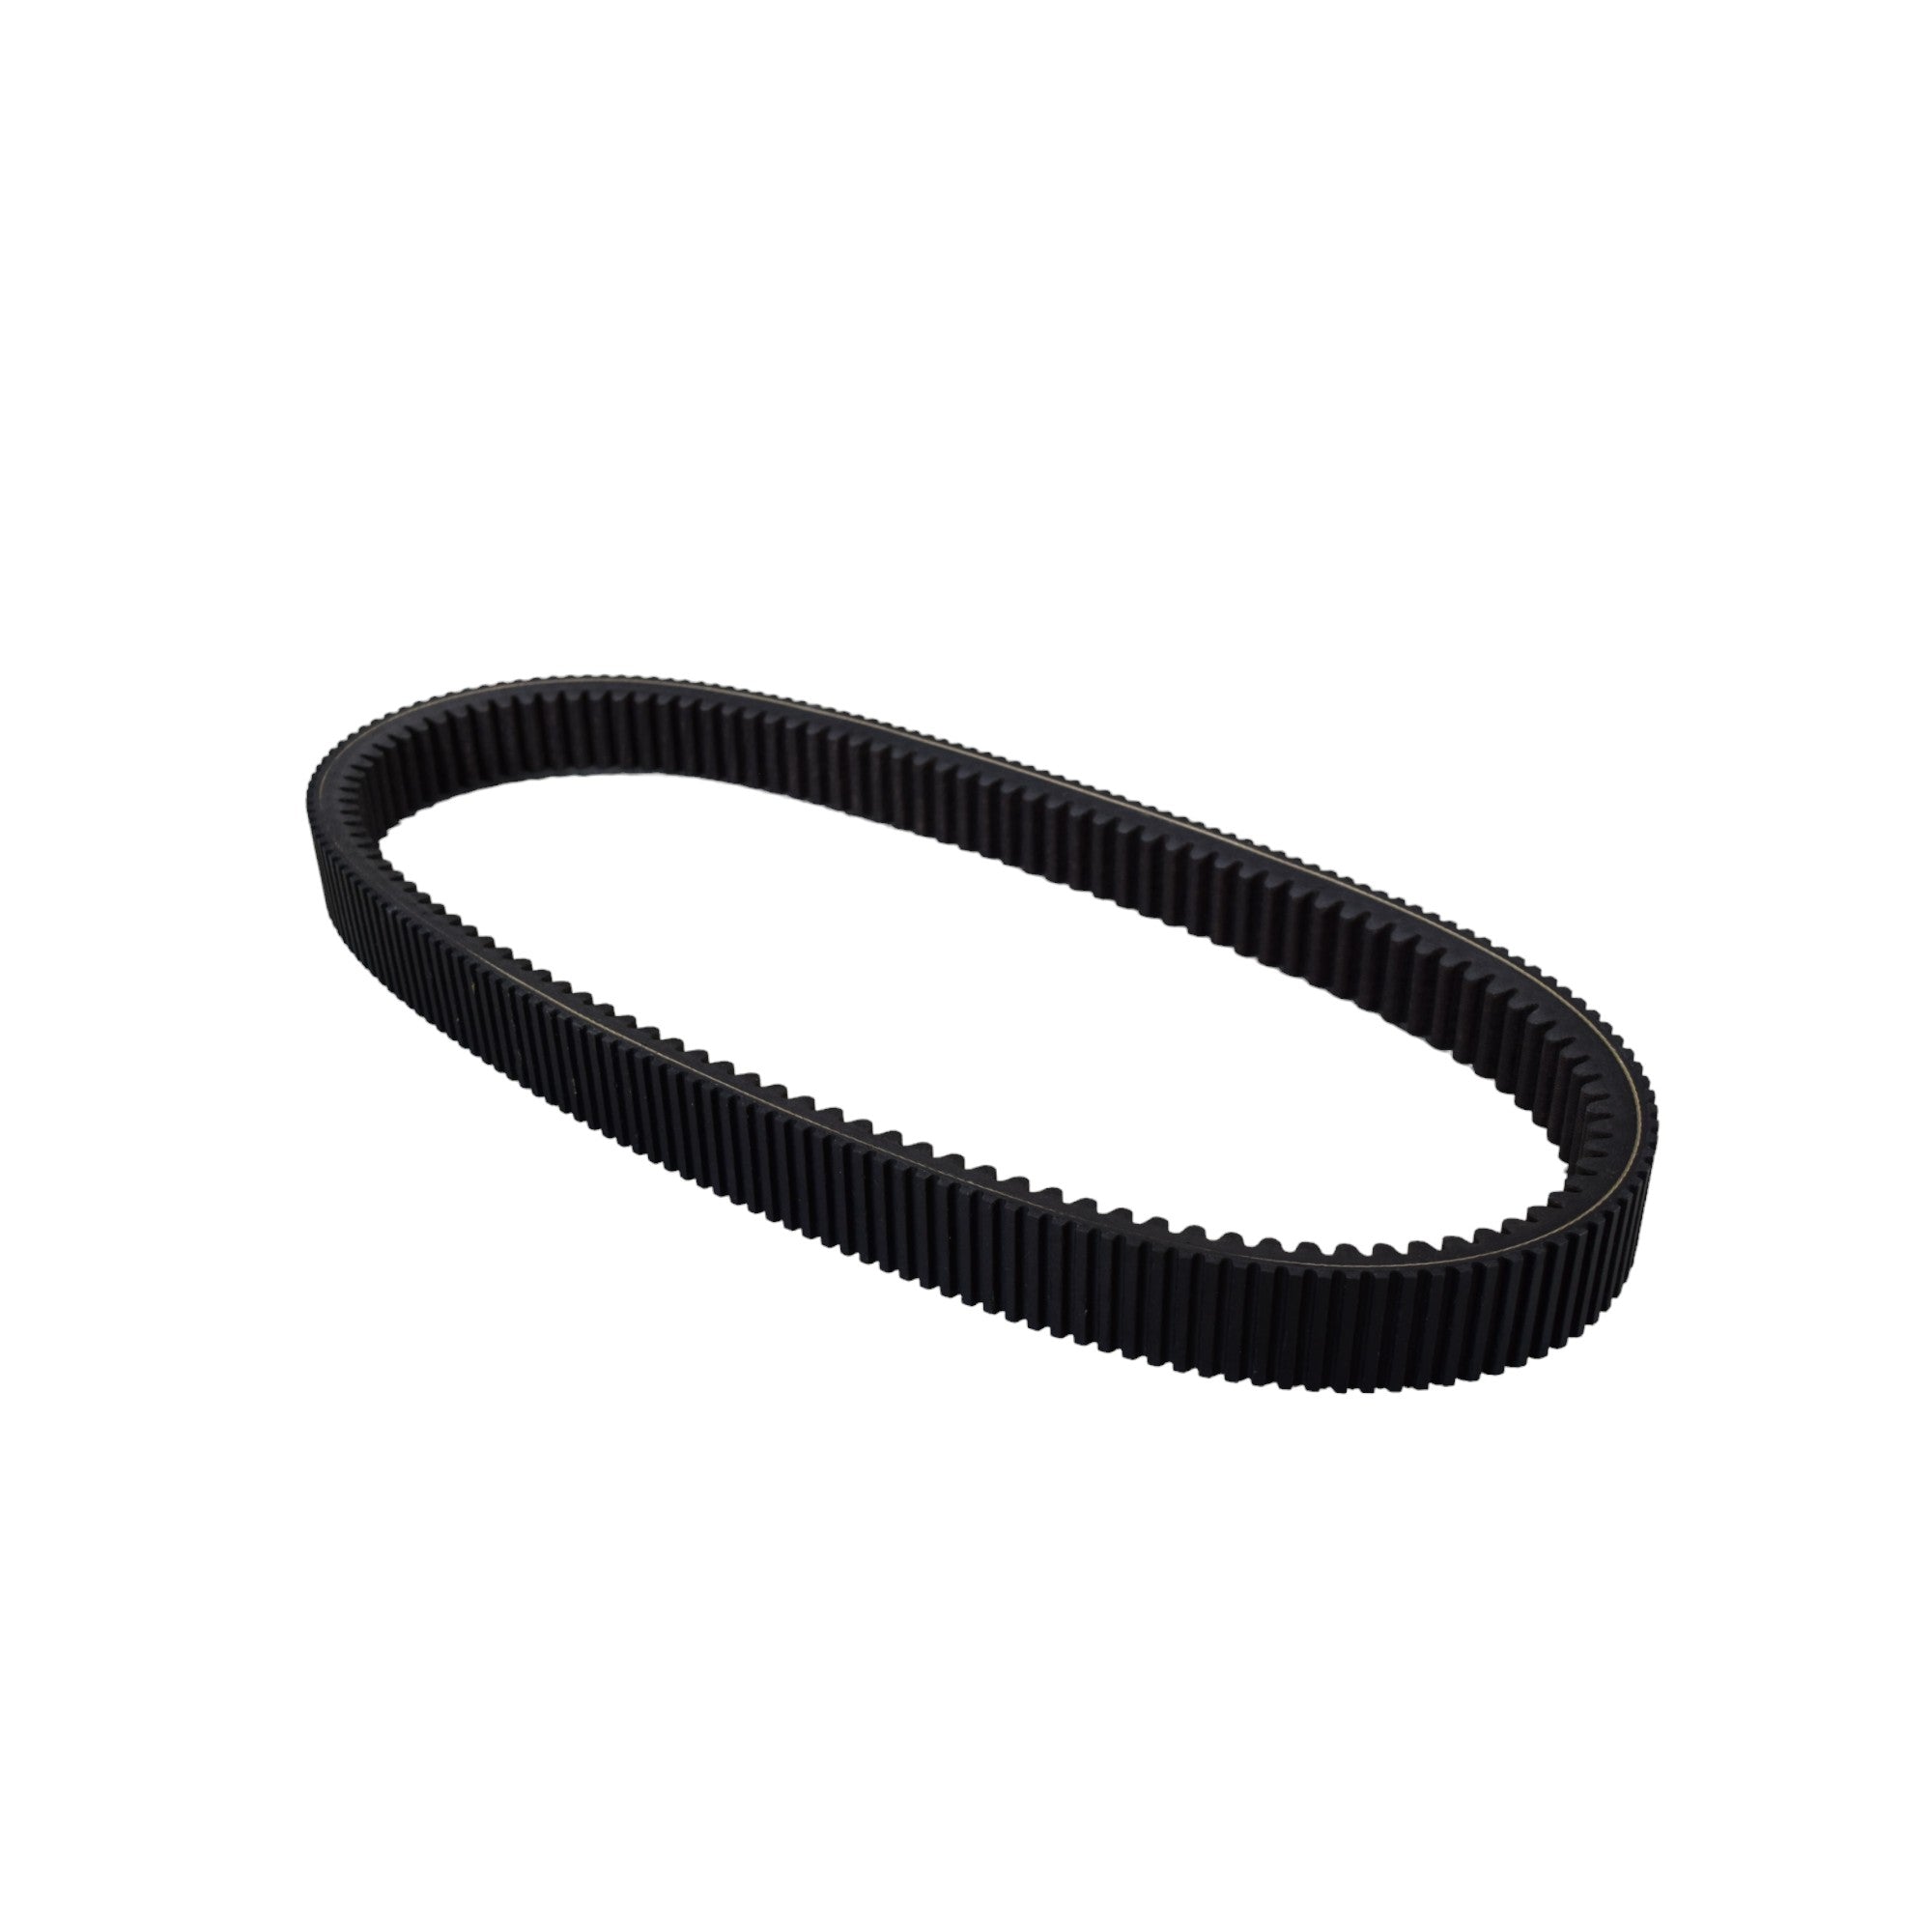 Ultimax XS819 Drive Belt for ARCTIC CAT OEM Replacement for 0627-060, 0627-046 (Made in USA)